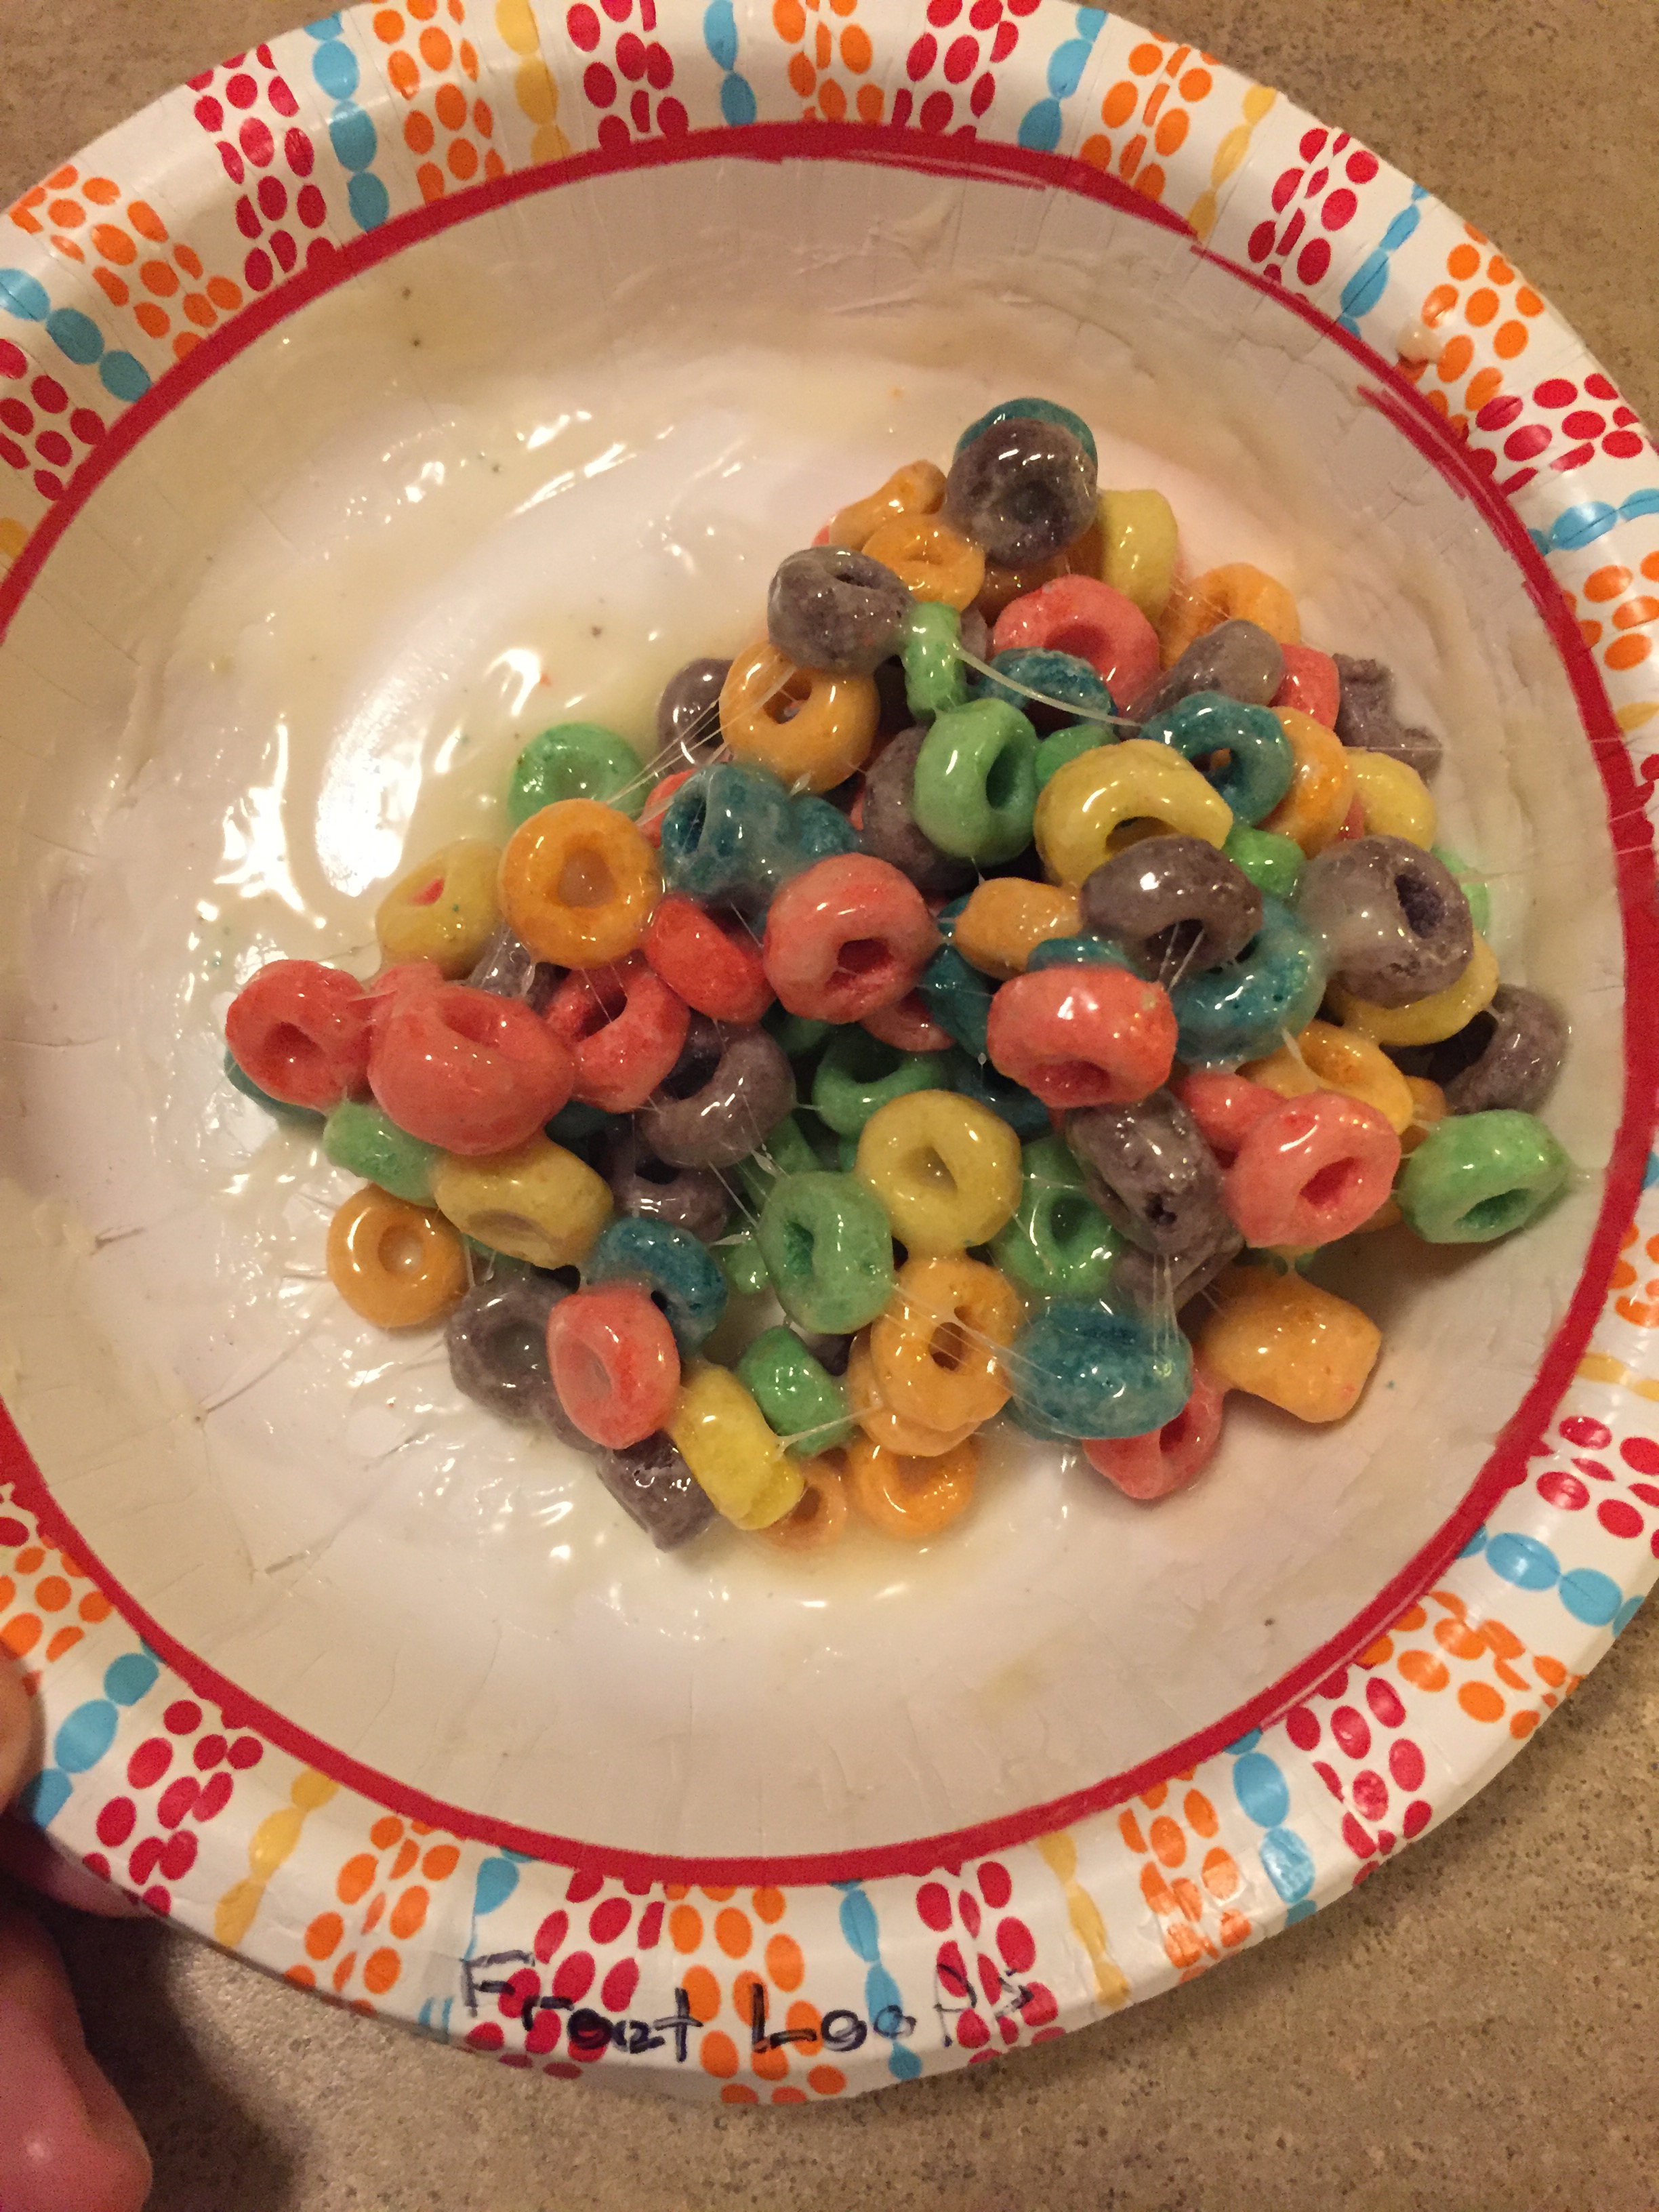 Fruit Loops Butthole